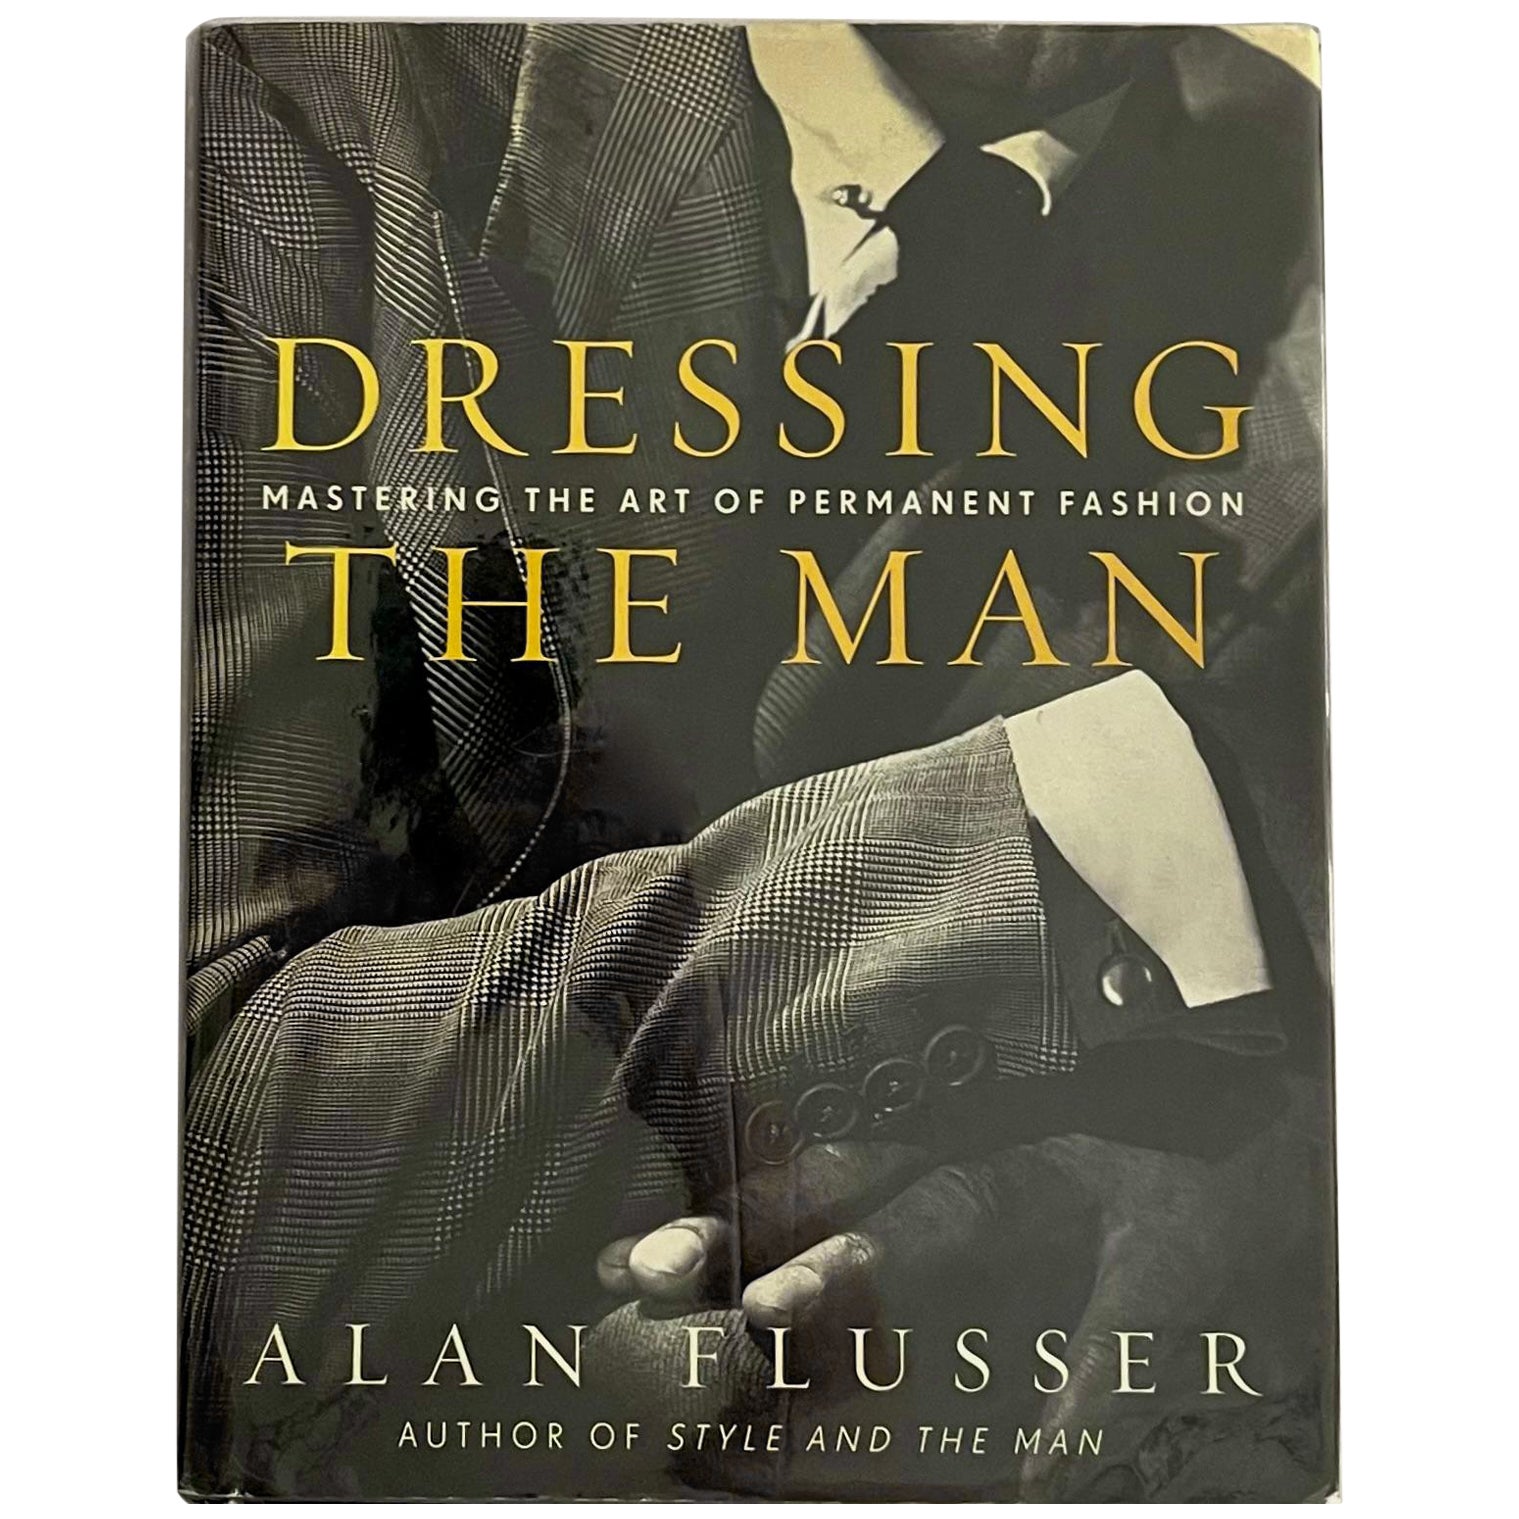 Dressing The Man: Mastering The Art of Permanent Fashion by Alan Flusser 2002 For Sale